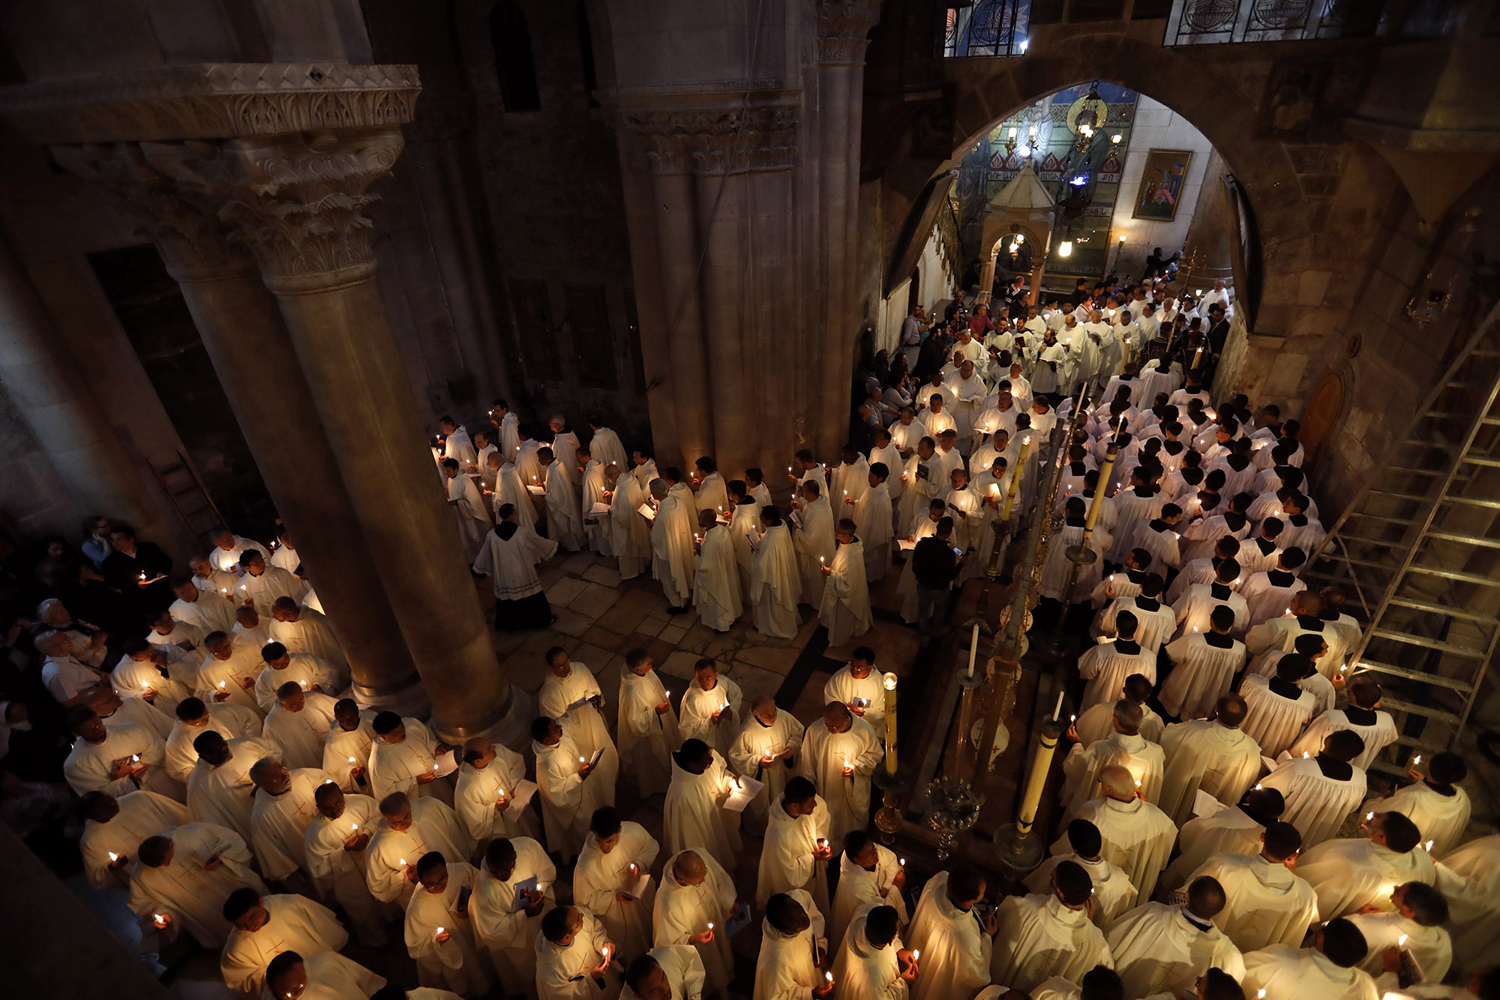 Latin Catholic clergymen hold candles as they circle the Anointing Stone during the Holy Thursday (Maundy Thursday) mass at the Church of the Holy Sepulchre in Jerusalem's Old City. PHOTO: REUTERS 